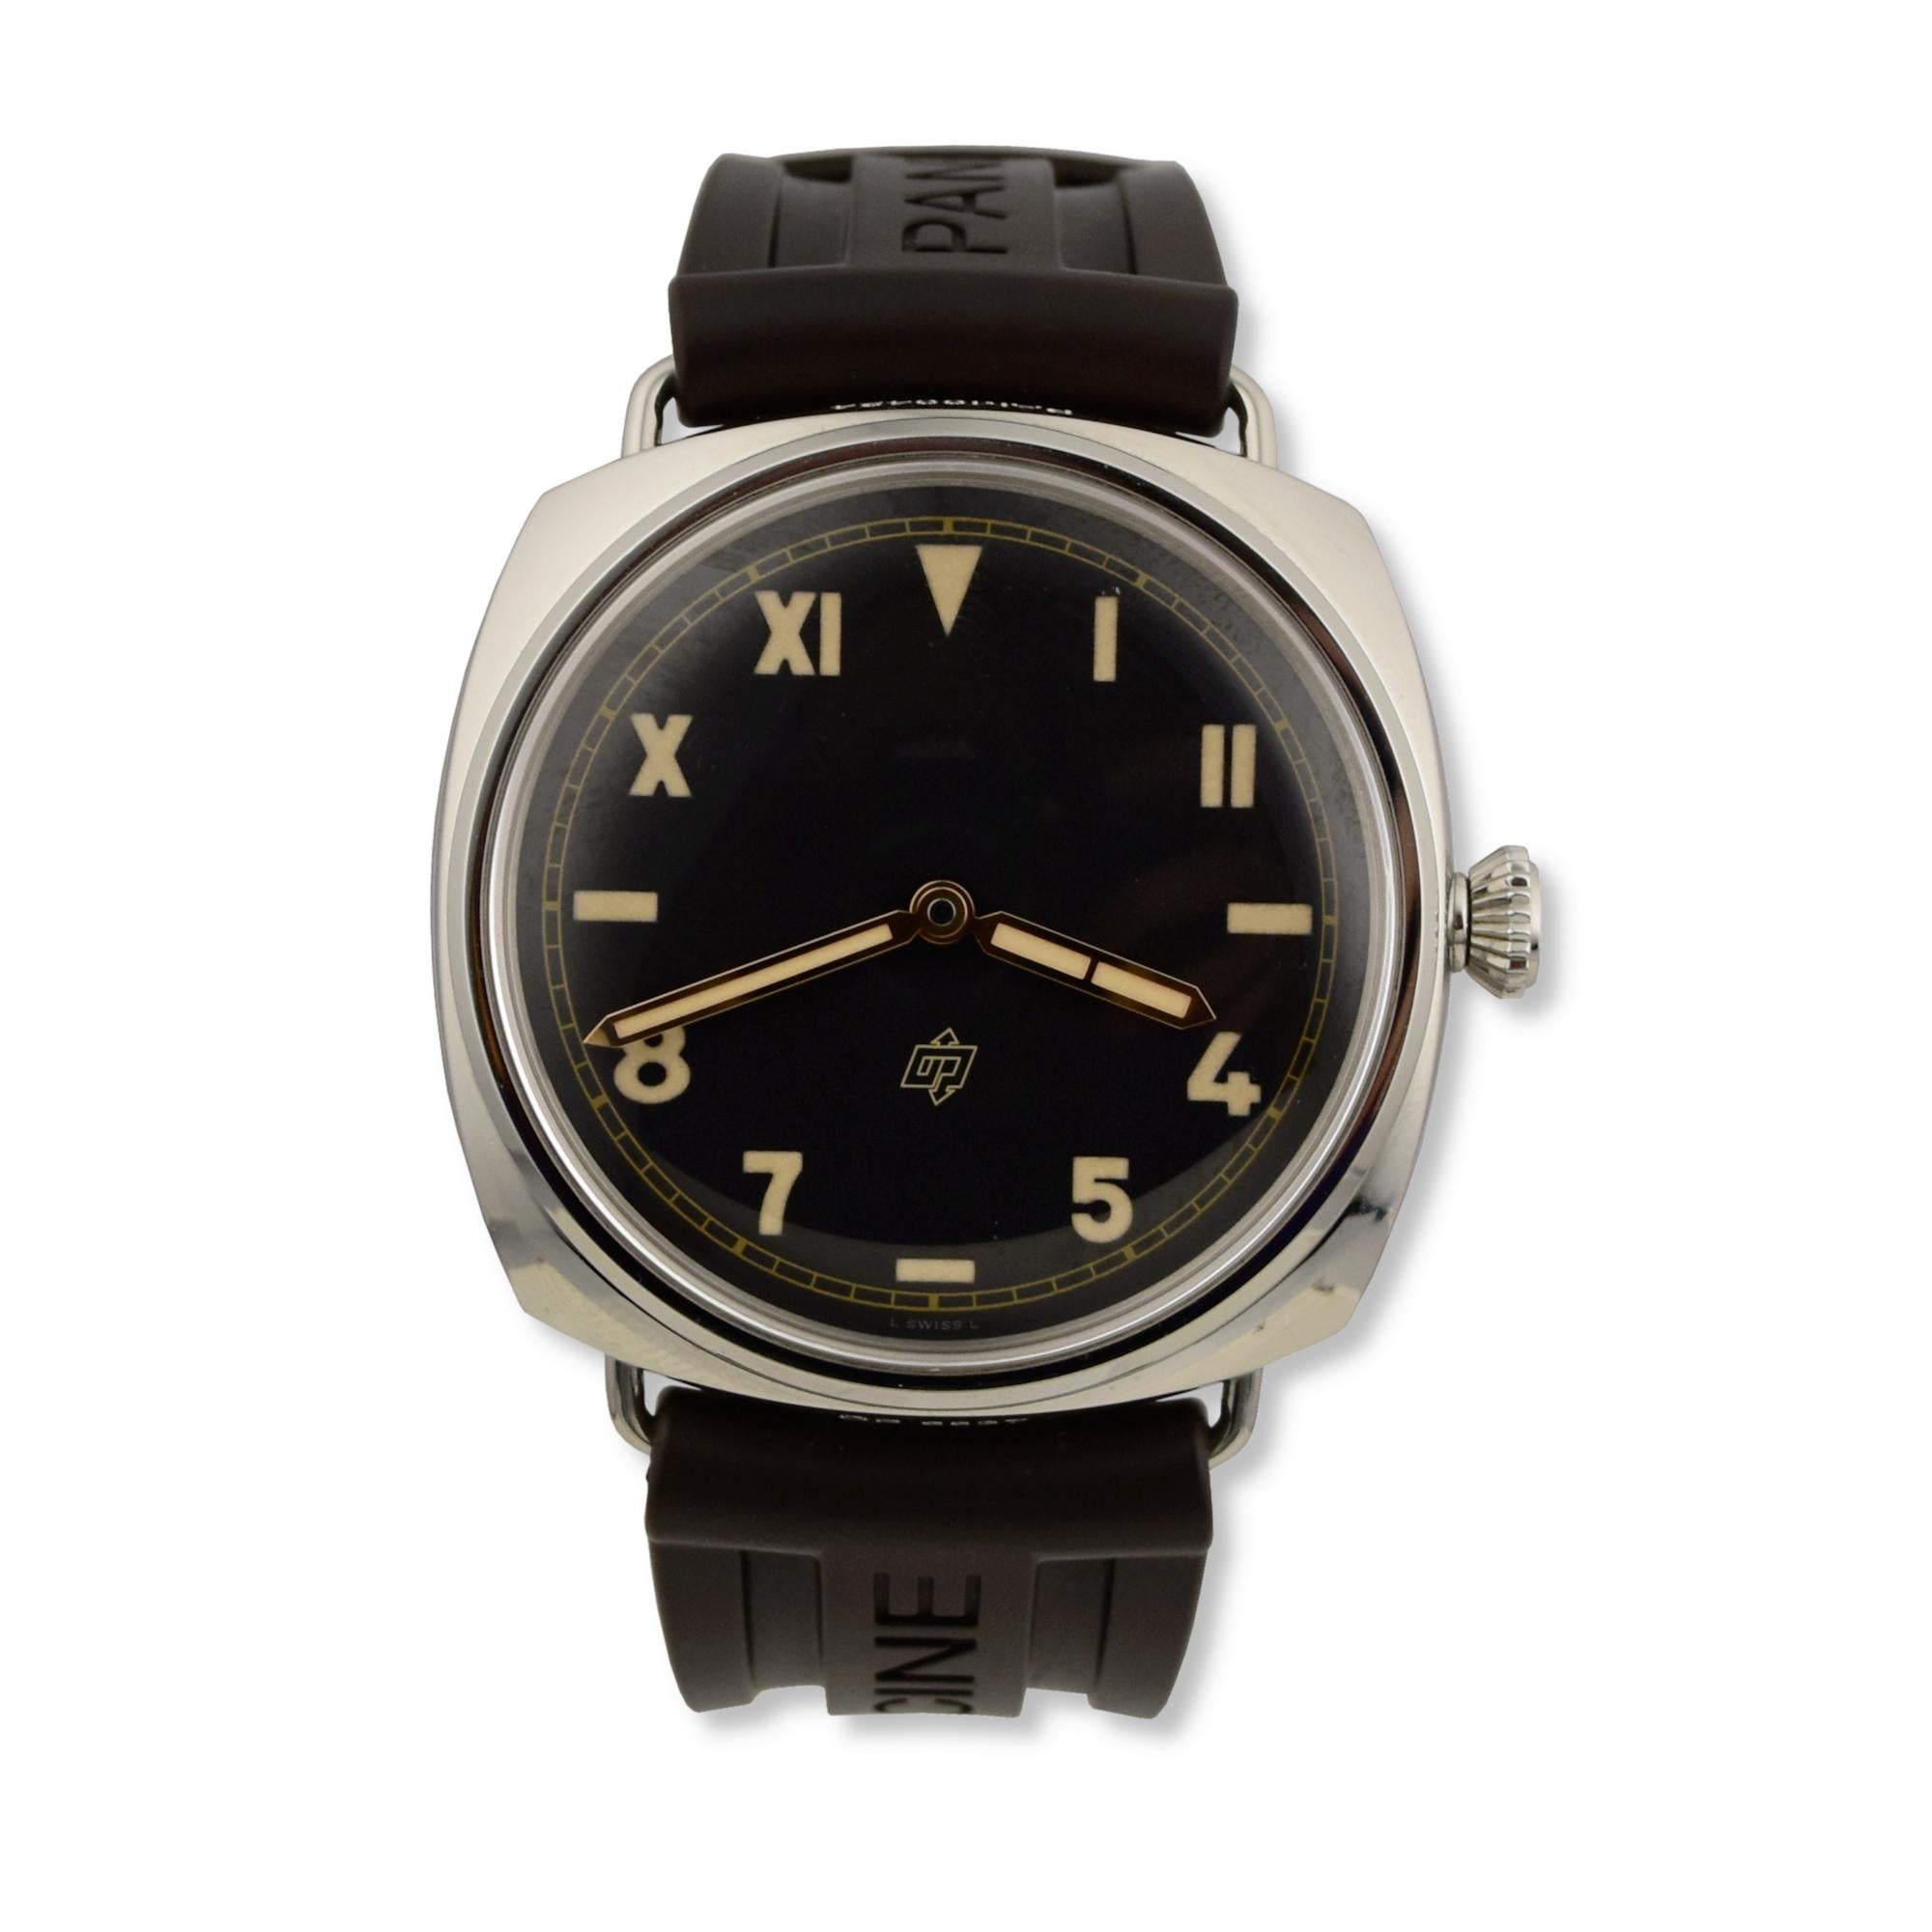 Brand: Panerai 
Model Name: Radiomir California
Model Number:  PAM00424
Movement: Automatic
Case Size: 47 mm
Case Back: Open-worked
Case Material: Stainless Steel
Bezel: Staineless Steel
Dial: Black
Bracelet:  Rubber
Hour Markers: Roman Numerals